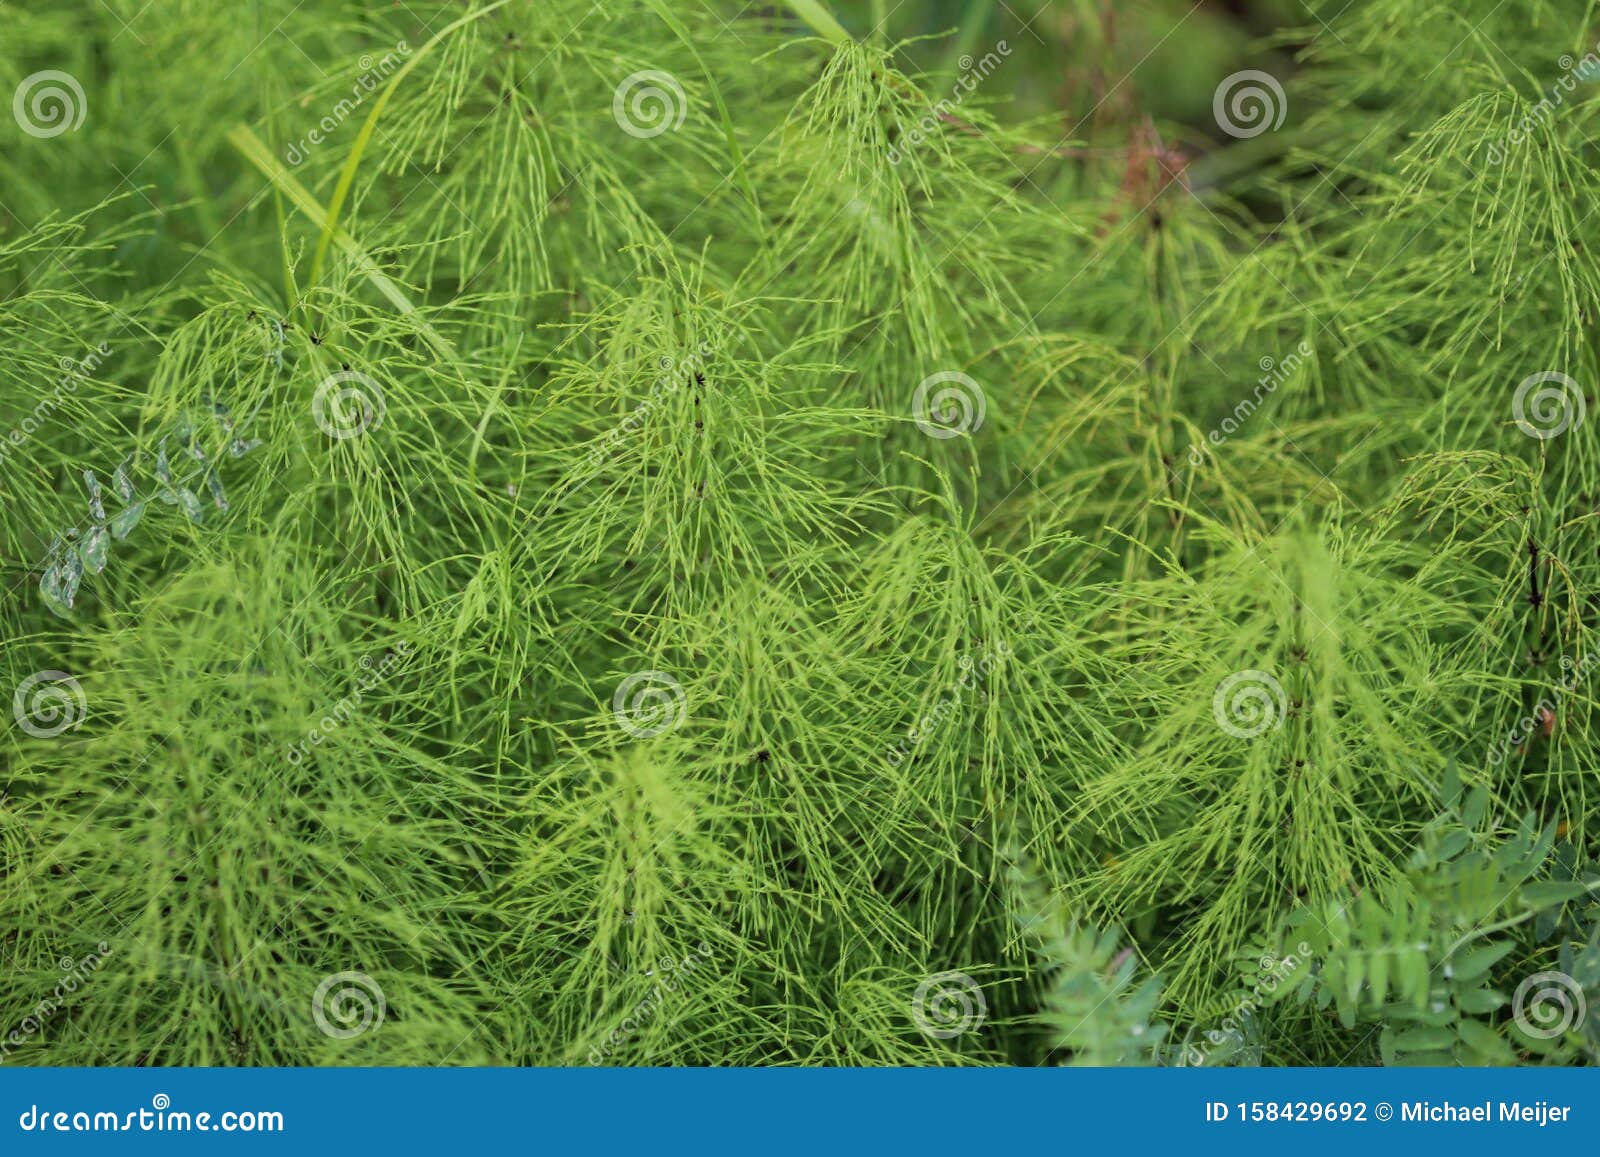 equisetum sylvaticum, the wood horsetail, growing in the forest